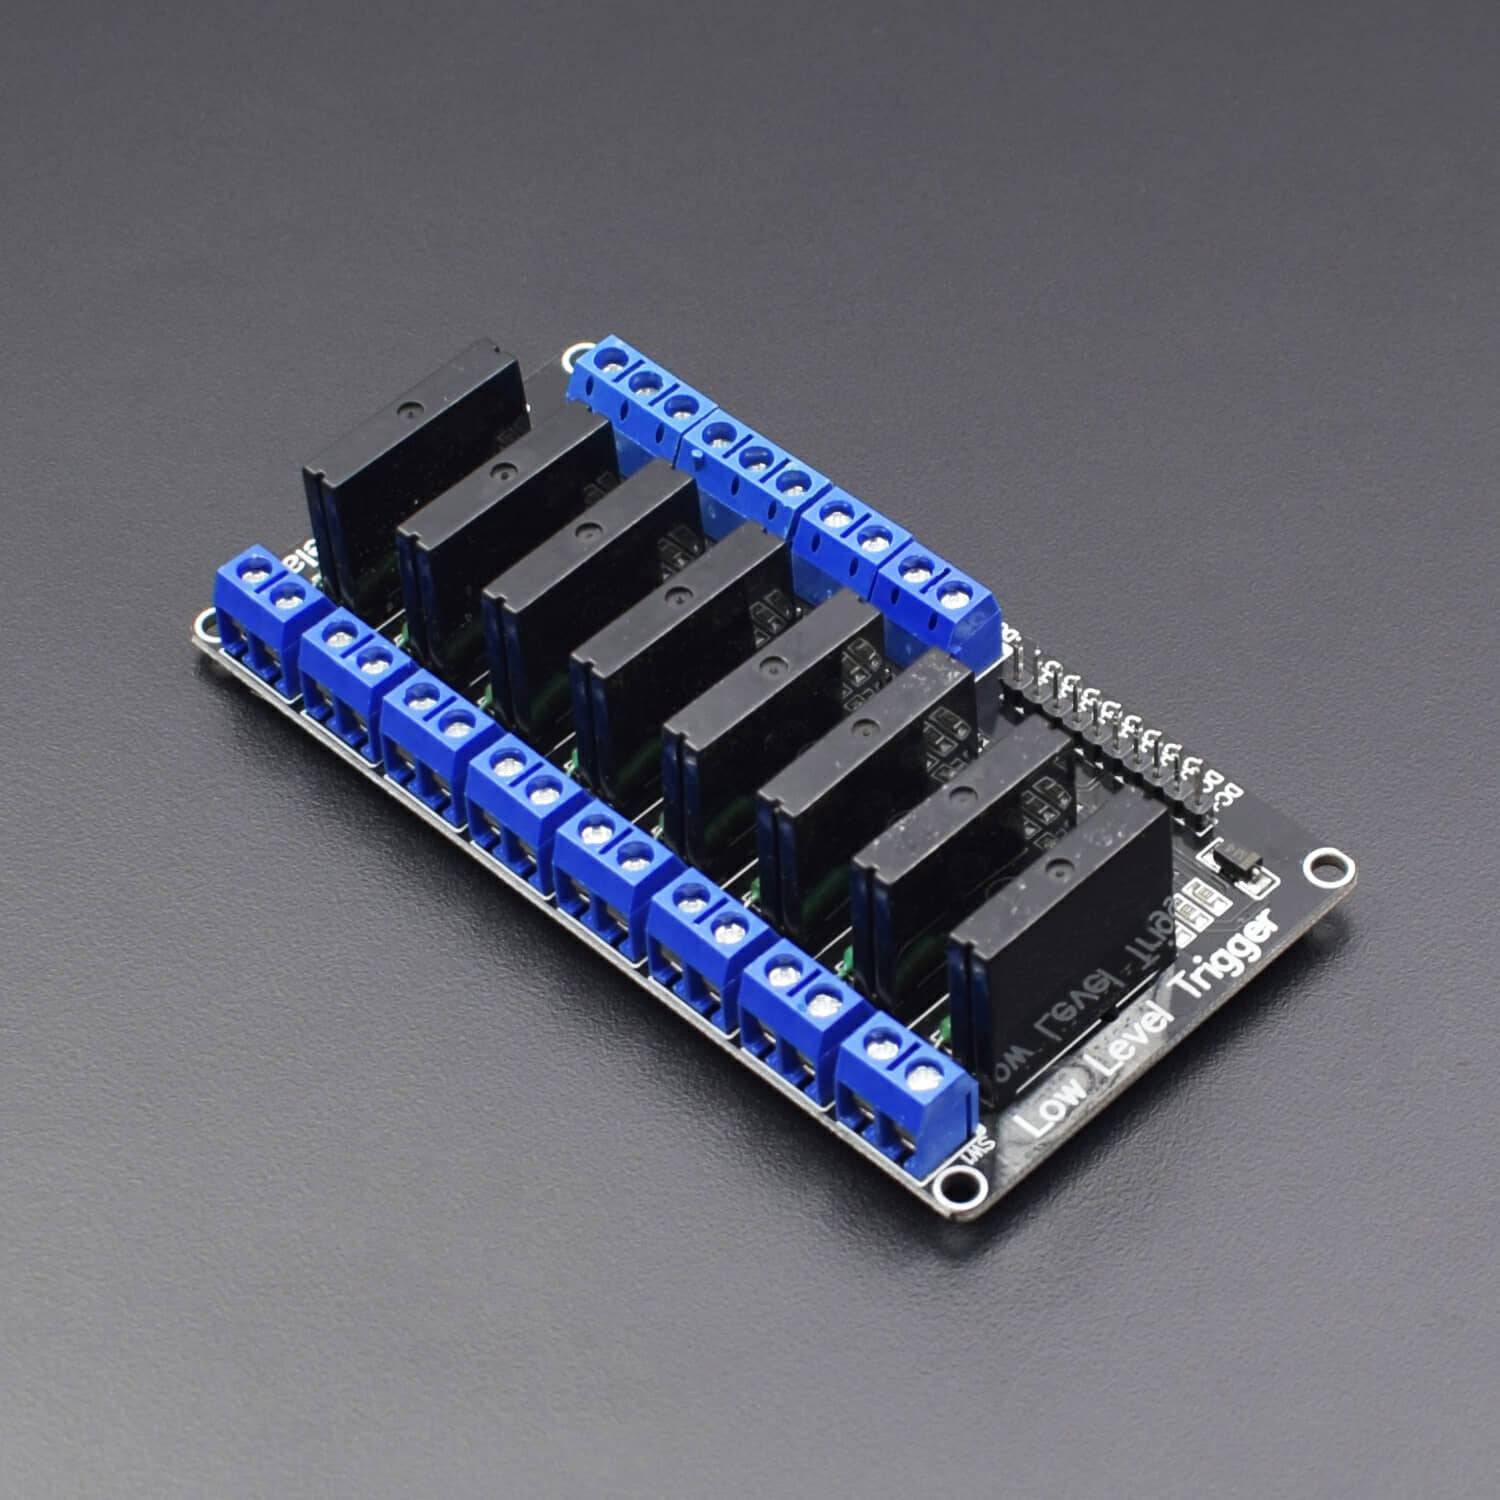 8-Channel 5V Solid State Relay Module Board for Arduino Uno Duemilanove MEGA2560 MEGA1280 ARM DSP PIC - NA170 - REES52